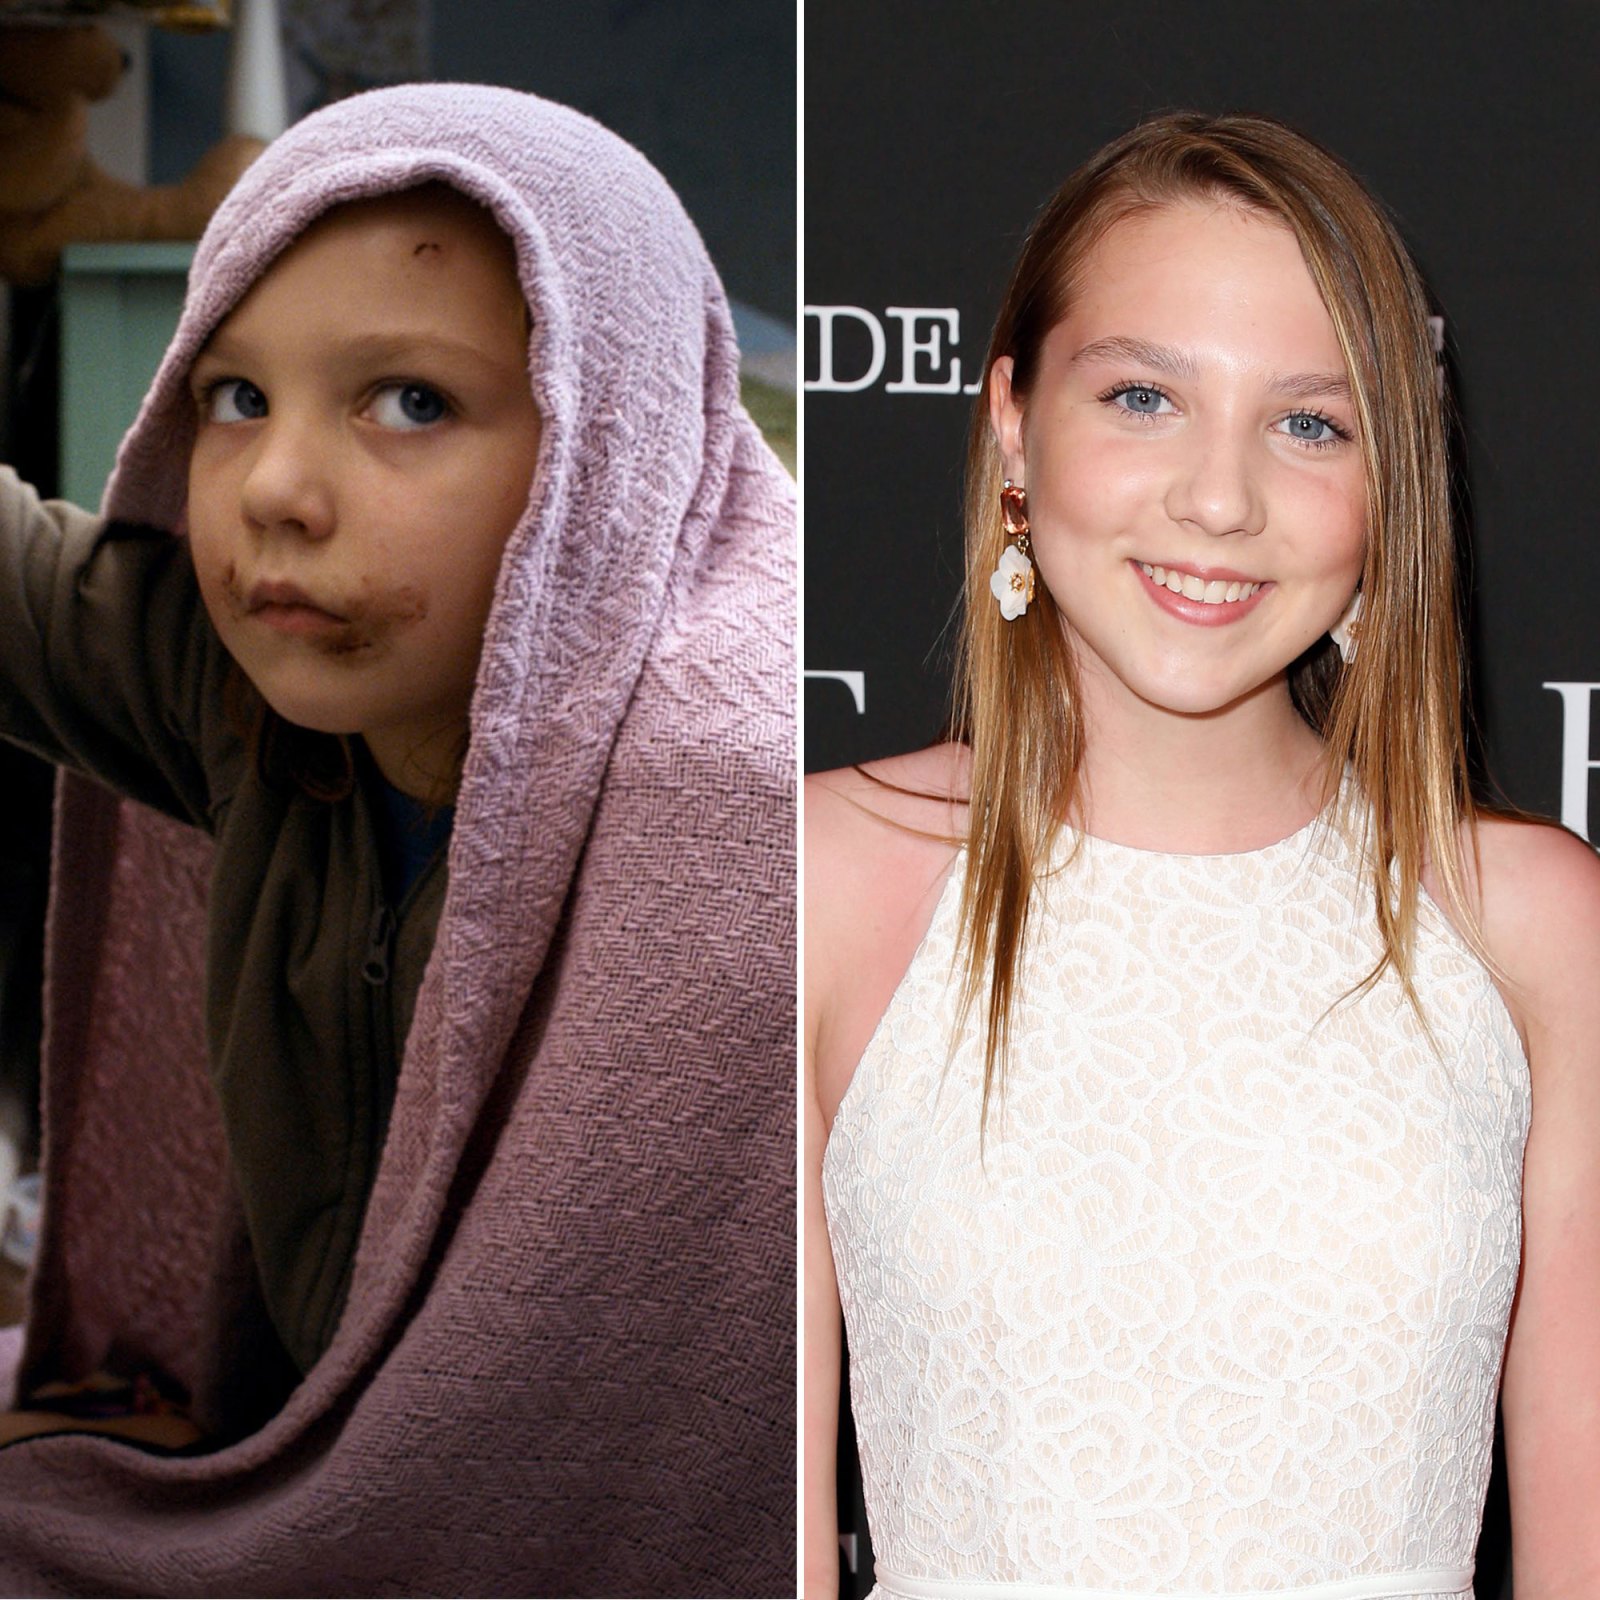 Isabelle Nélisse Creepy Horror Movie Kids Where Are They Now? Drew Barrymore Haley Joel Osment and More